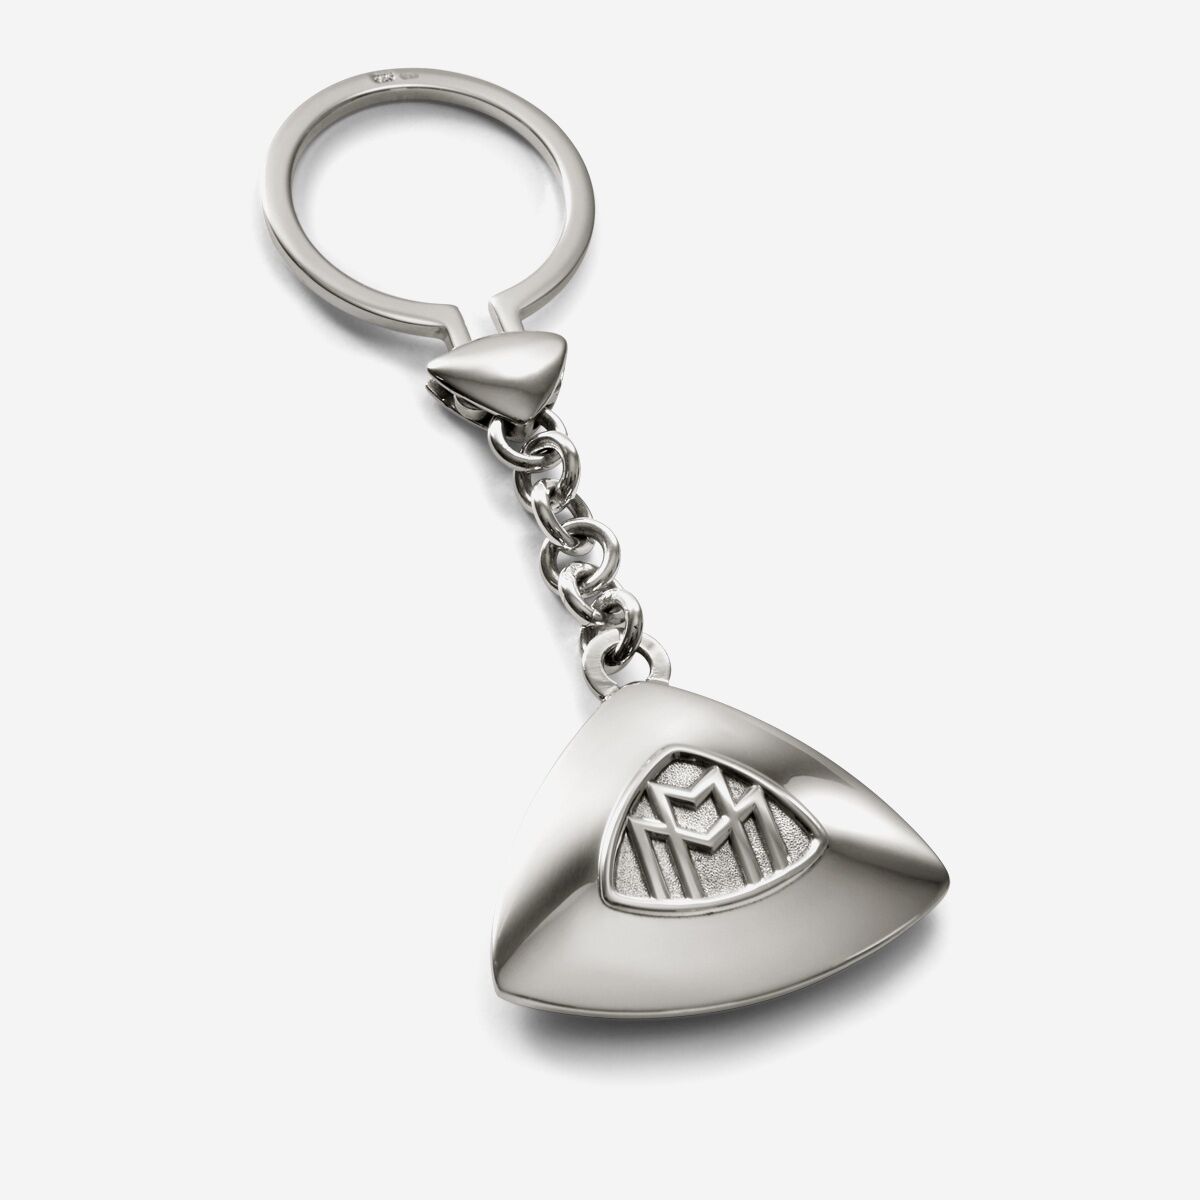 The Sterling Keychain I